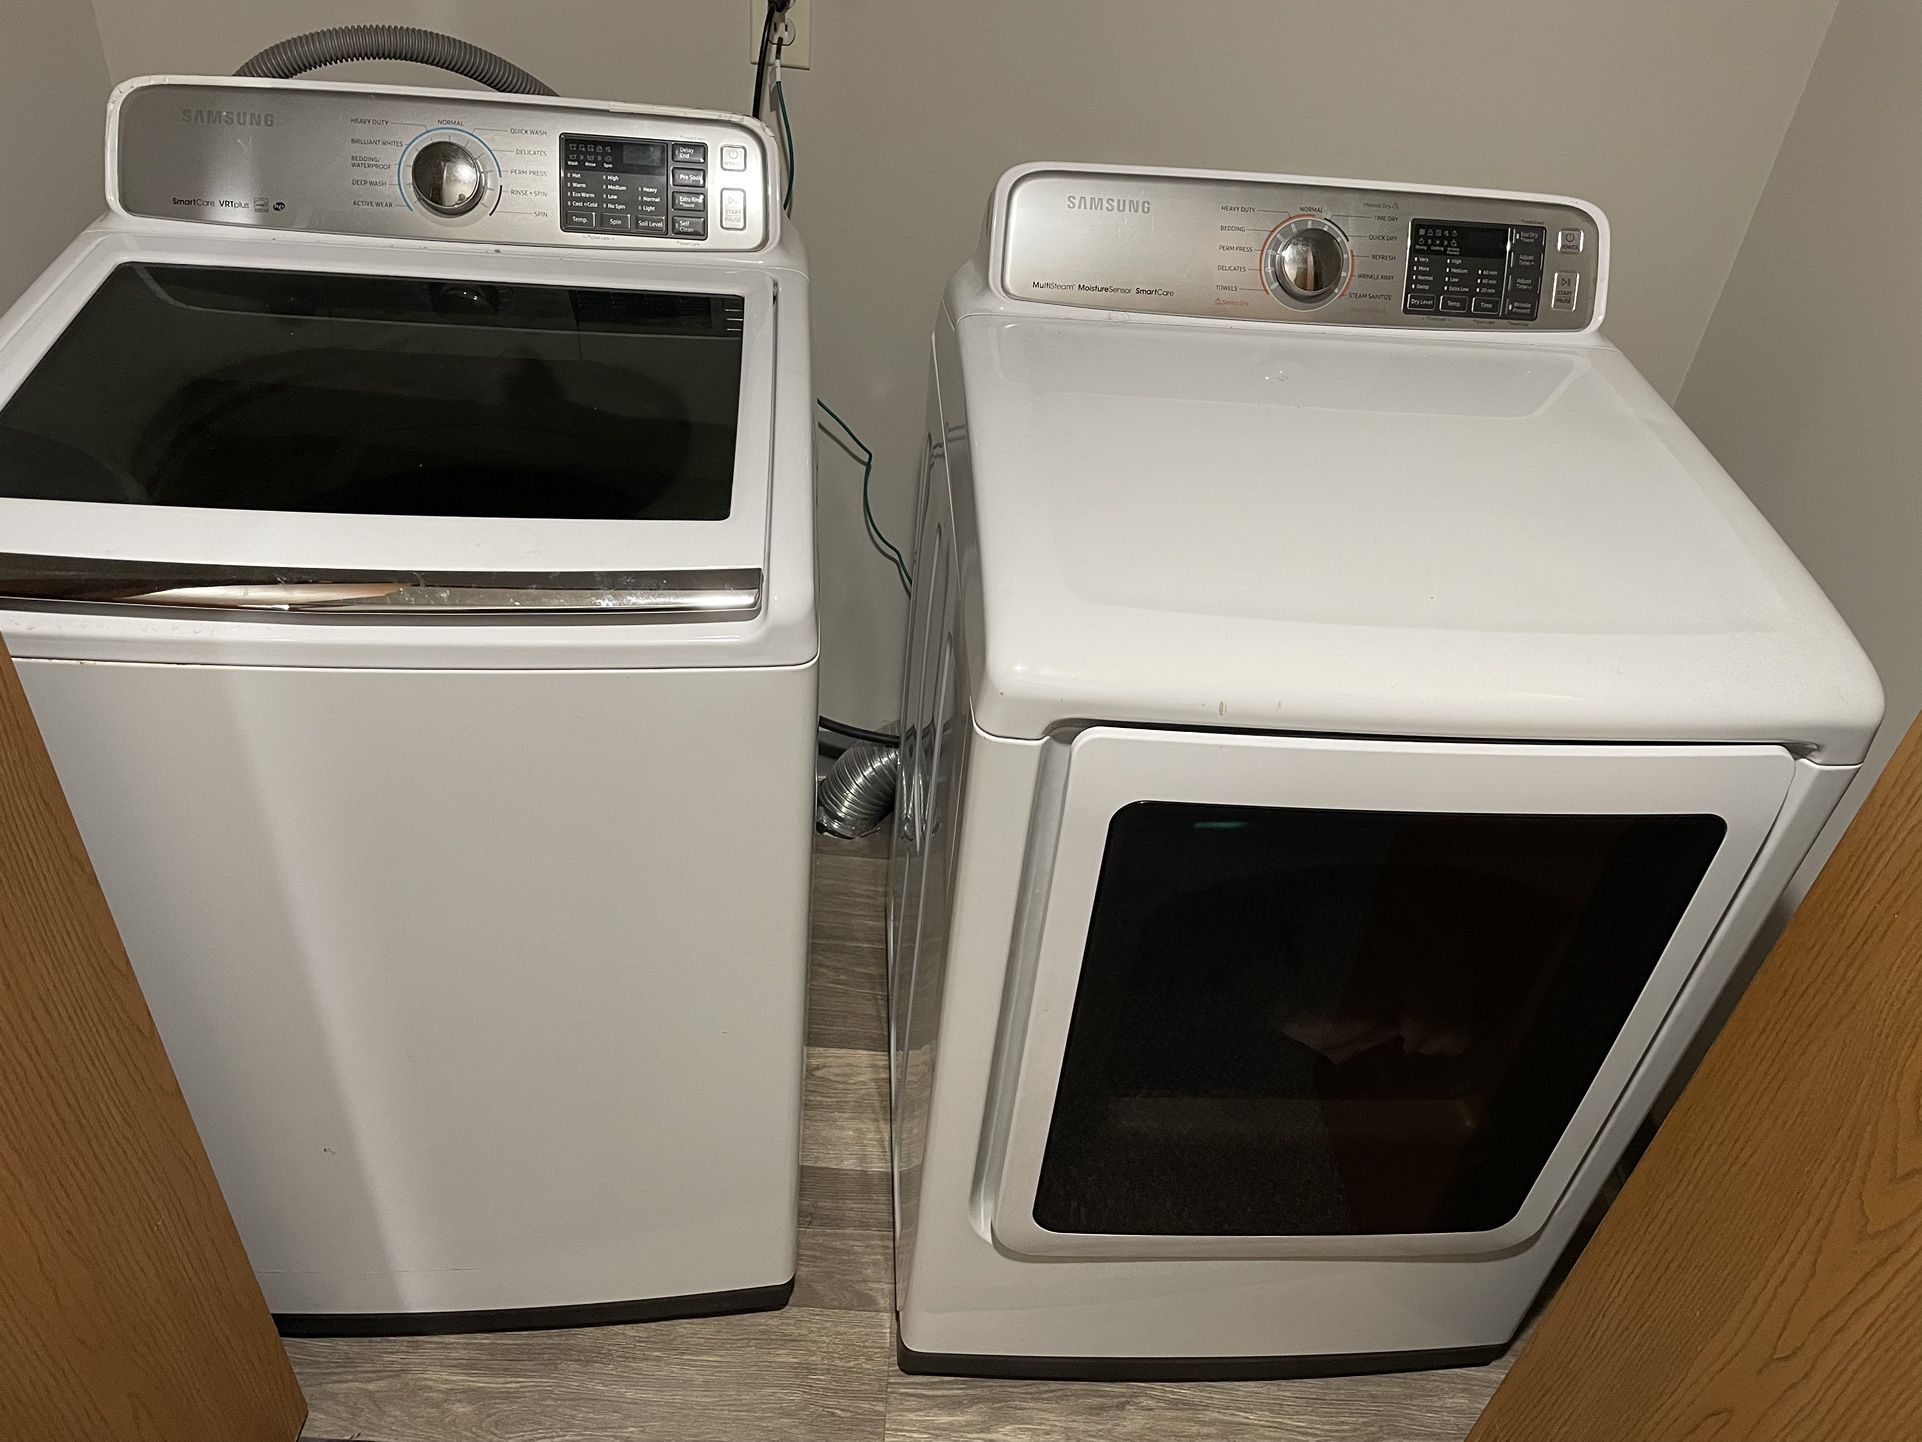 Samsung Washer And Dryer Set Xl Costco set - Price Lowered To Sell Quickly